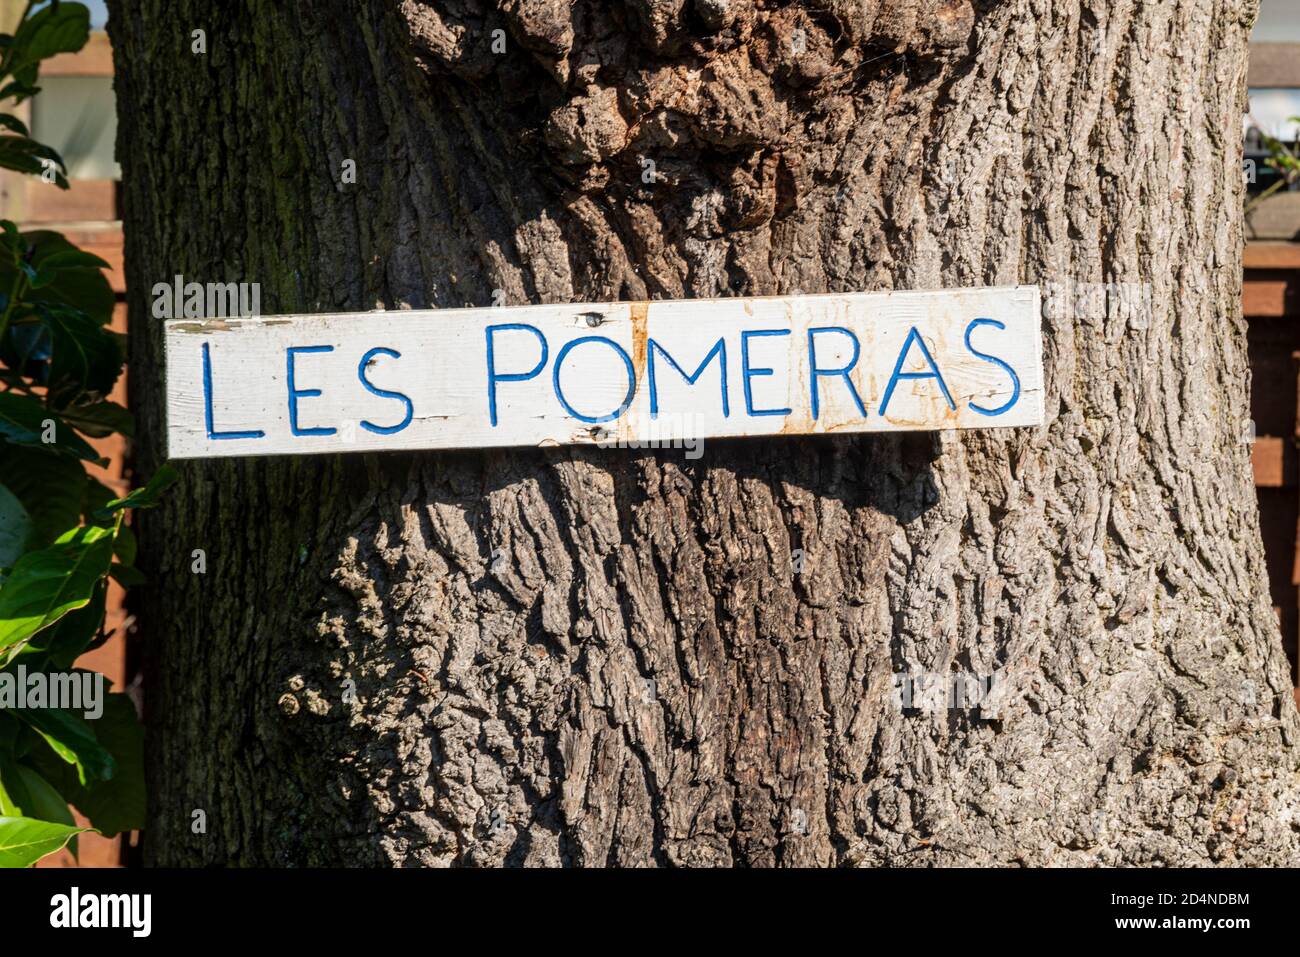 Les Pomeras house sign attached to tree on Ironwell Lane byway in Hawkwell, Rochford, Essex, UK. Rural, countryside area north of Southend Stock Photo